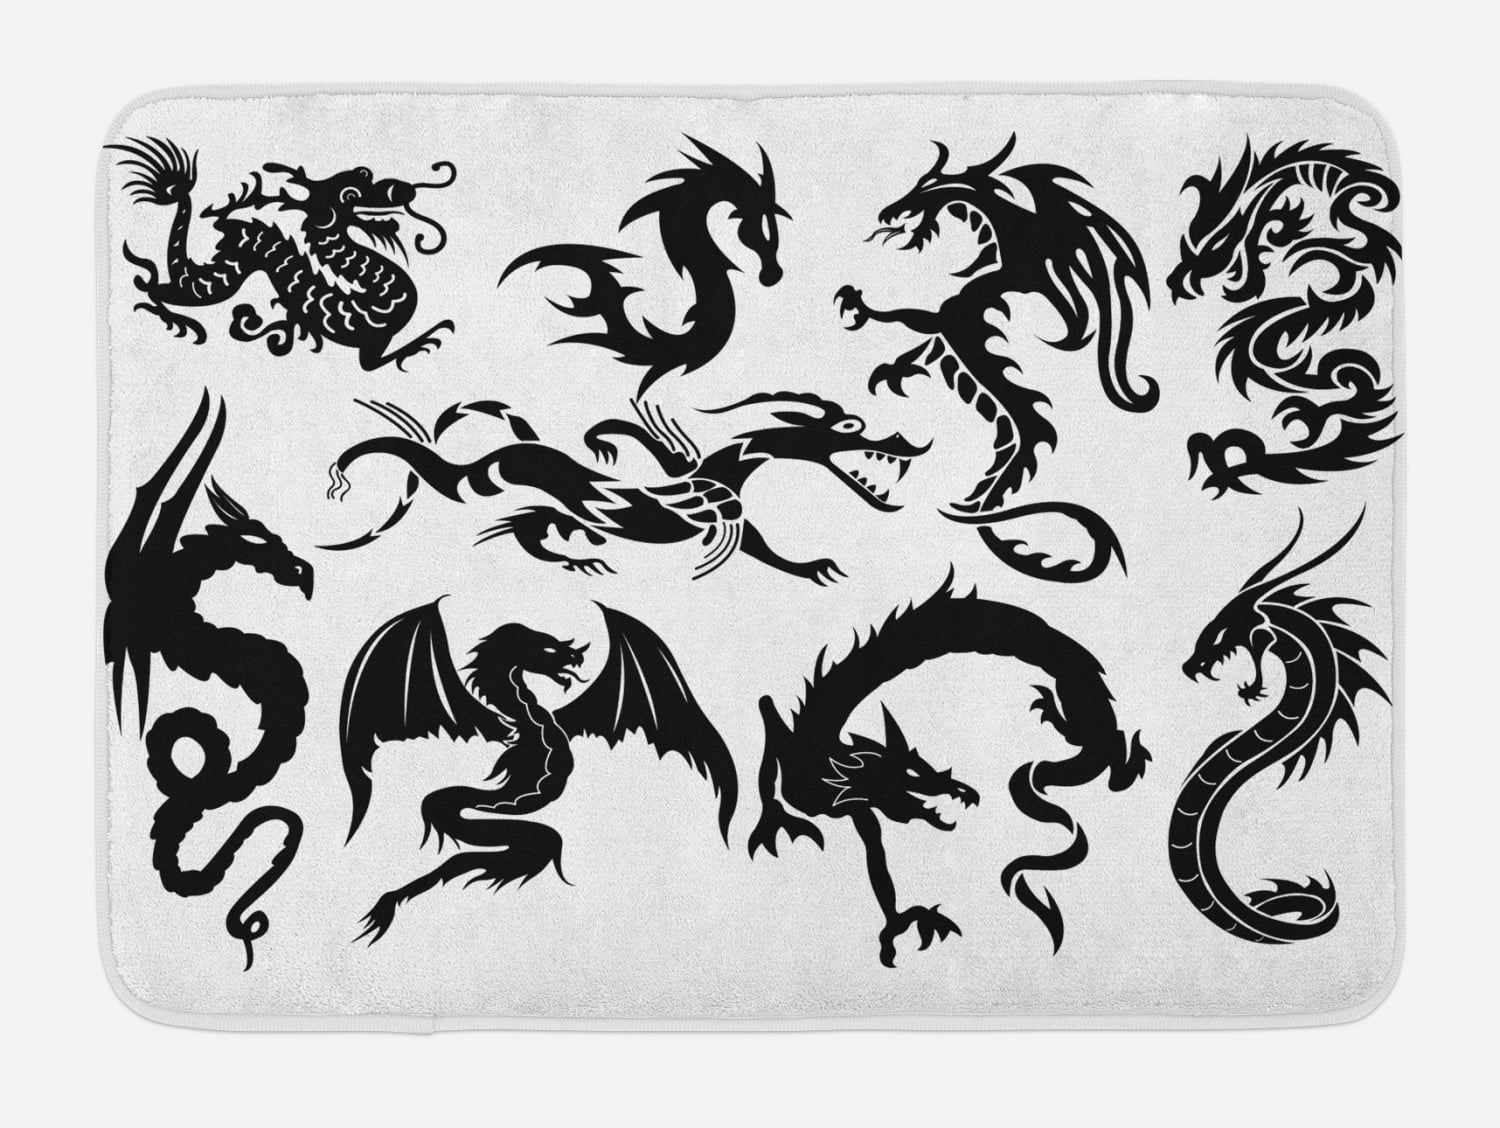 Ambesonne Dragon Bath Mat 29.5 X 17.5 Ivory Ruby Plush Bathroom Decor Mat with Non Slip Backing Angry Dragon Doodle on Grunge Background Japanese Eastern Ethereal Pattern Print 